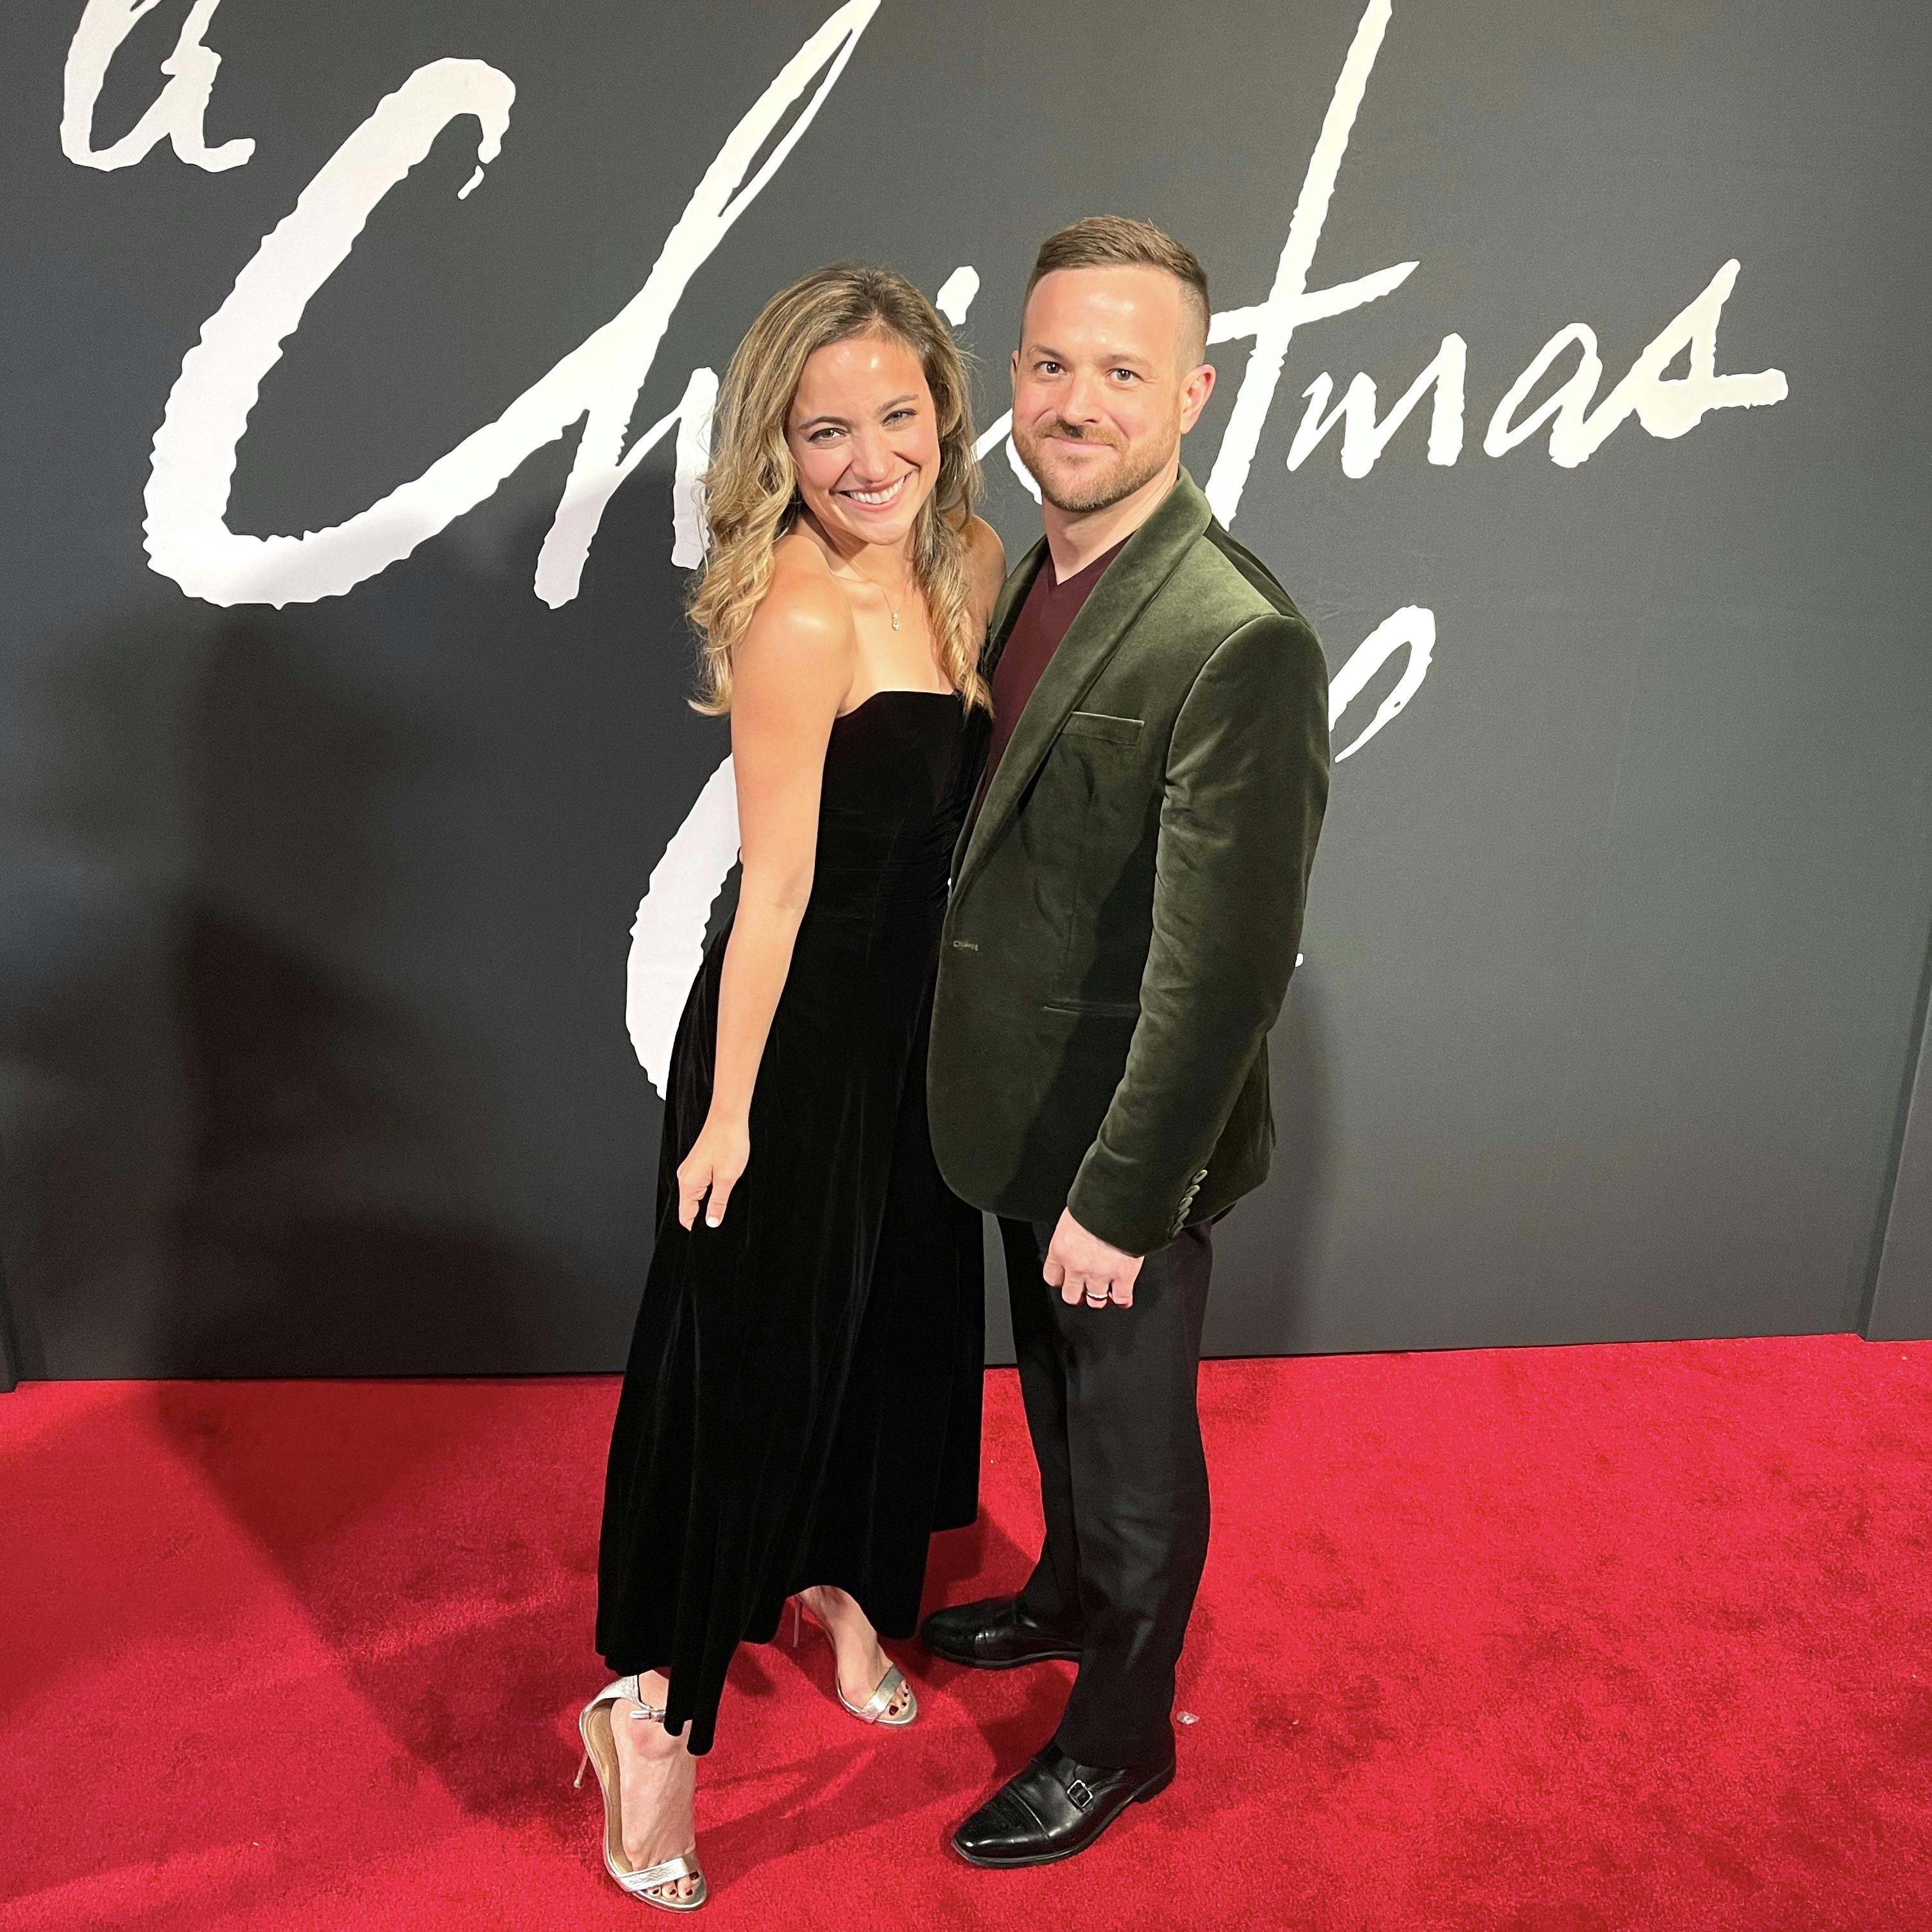 A Christmas Carol Opening Night - Christy Altomare and Chris Crook